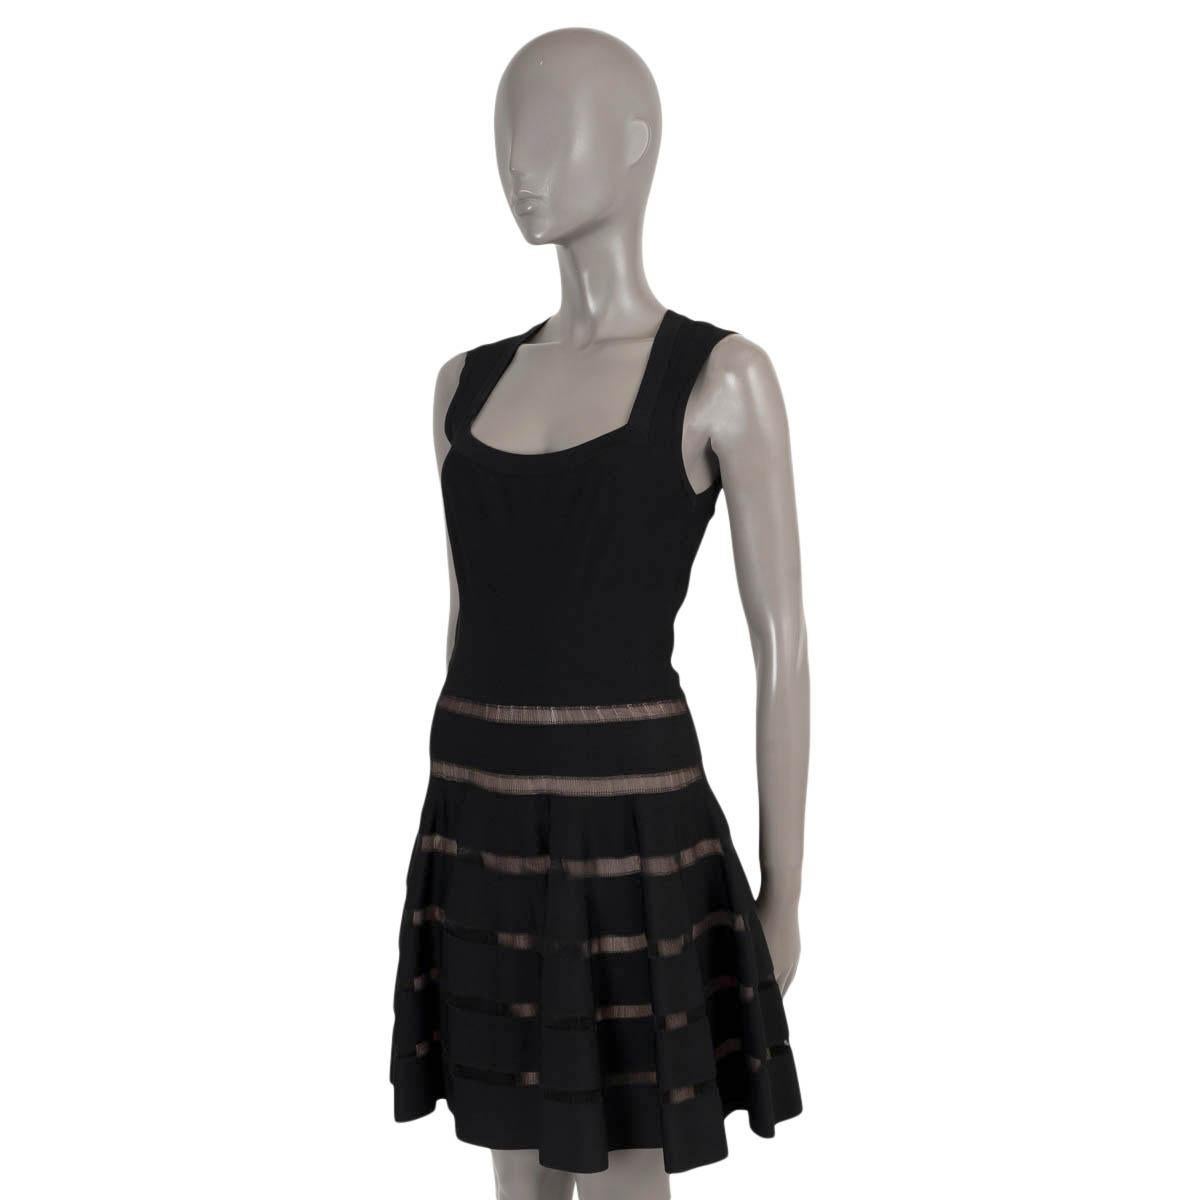 100% authentic Alaïa flared knit dress in black viscose (73%), polyester (17%), silk (6%) and cotton (4%). Features sheer strip panels on the skirt and a scoop neck. Opens with a zipper in the back. Unlined. Has been worn and is in excellent